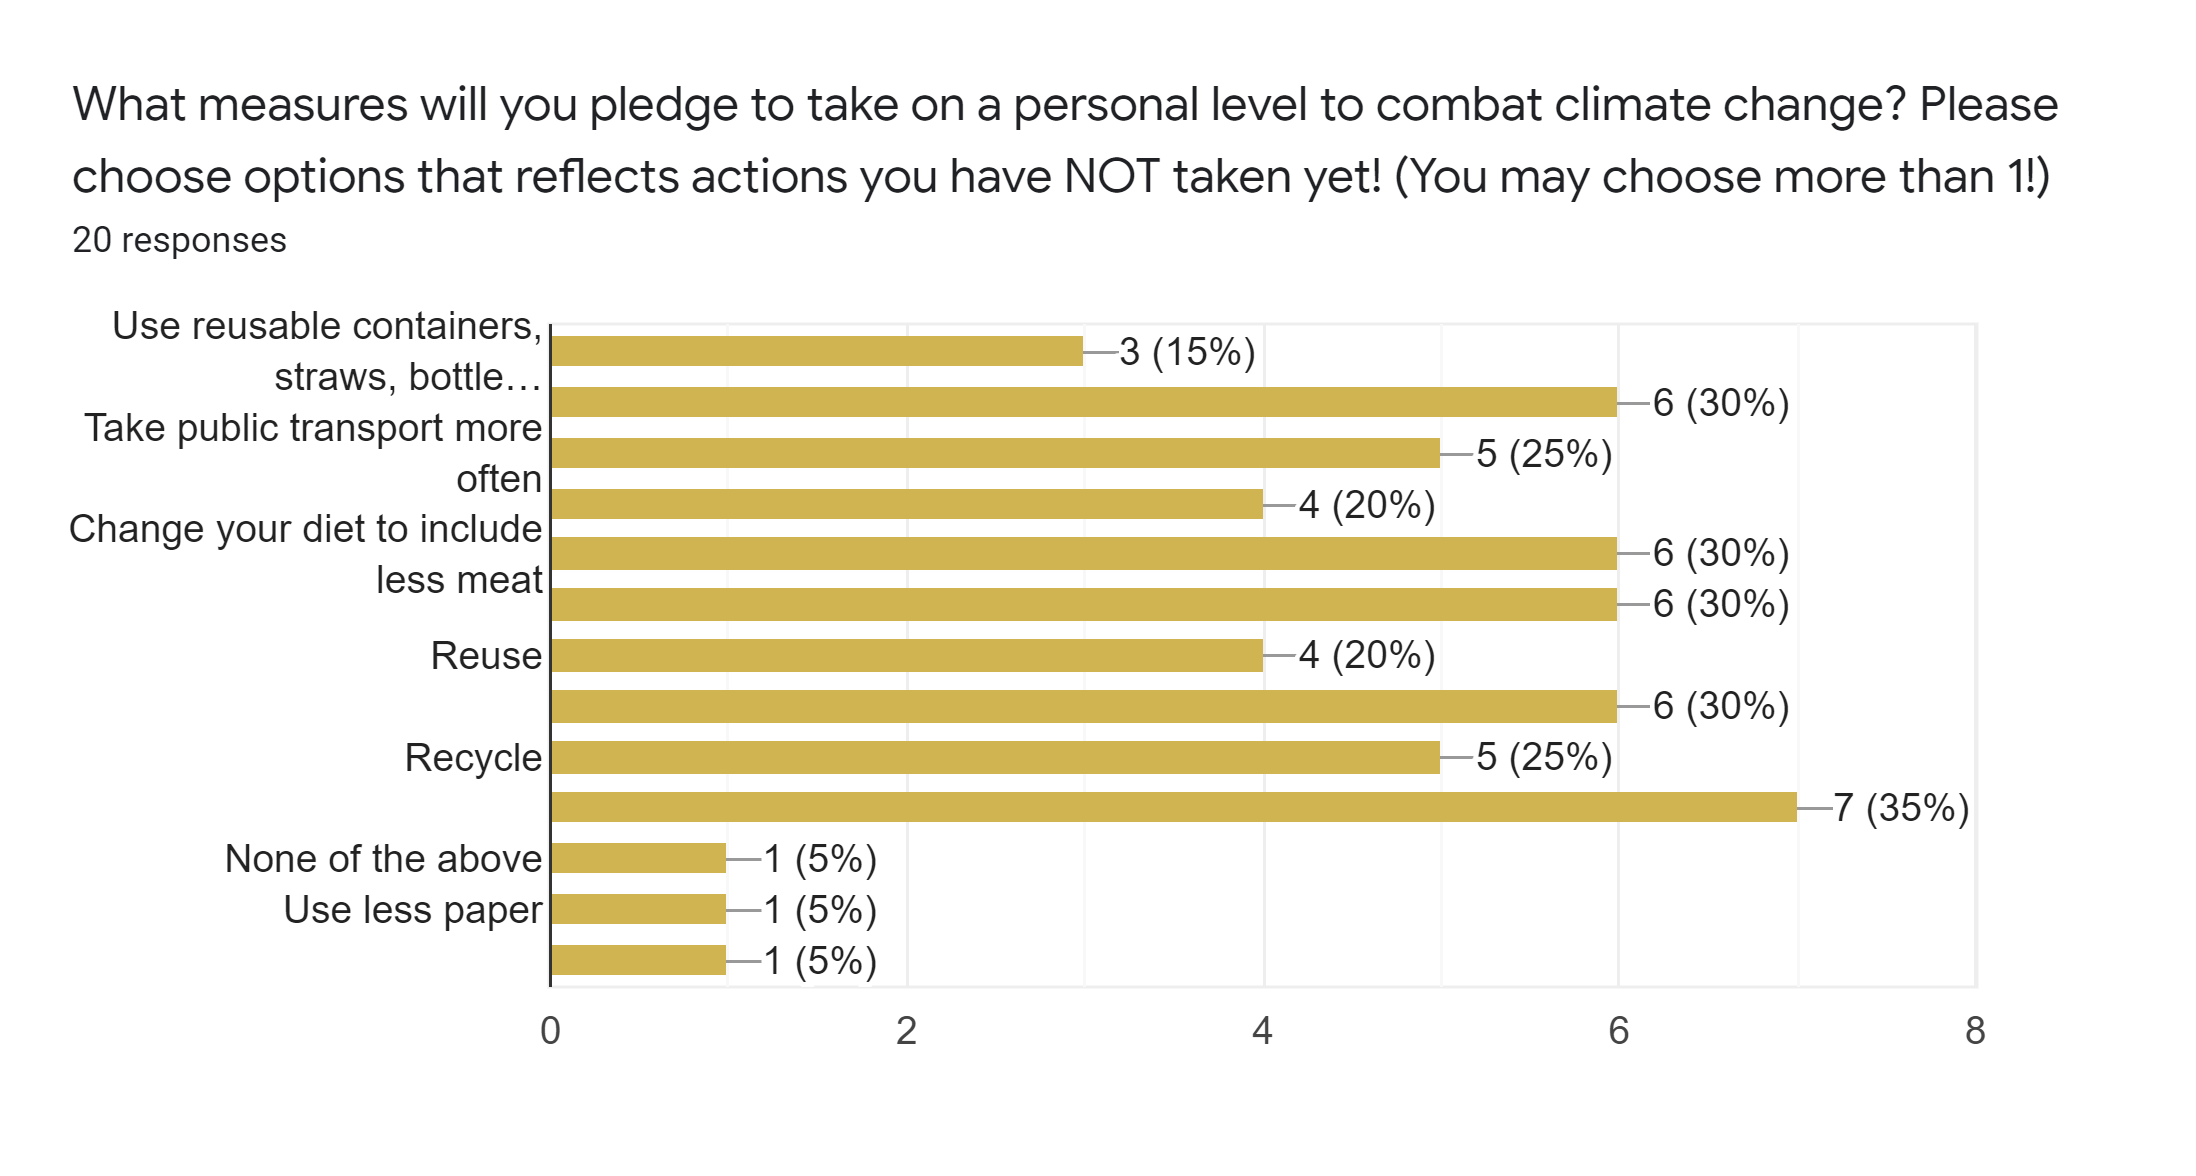 19 of 20 respondents were willing to make at least one change to their current lifestyle